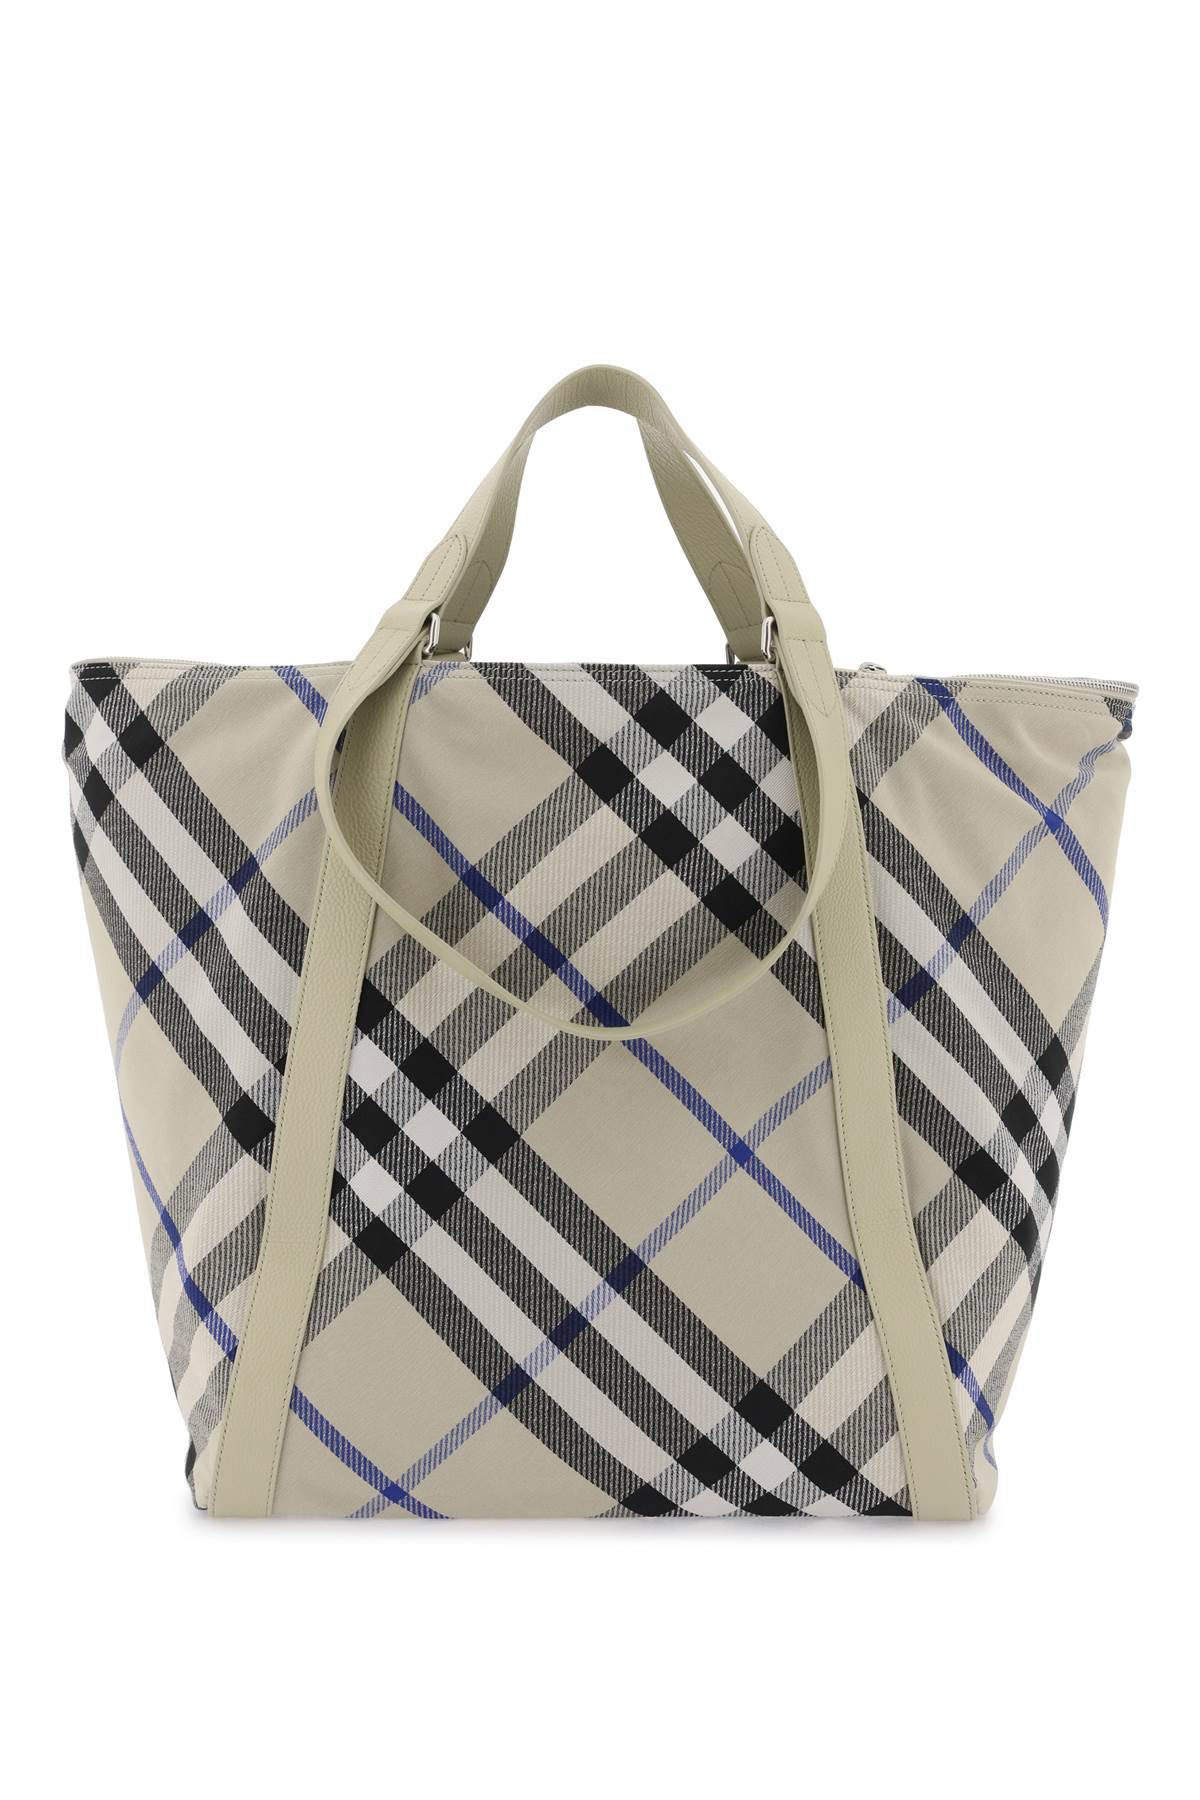 Burberry Ered  Checkered Tote In Khaki